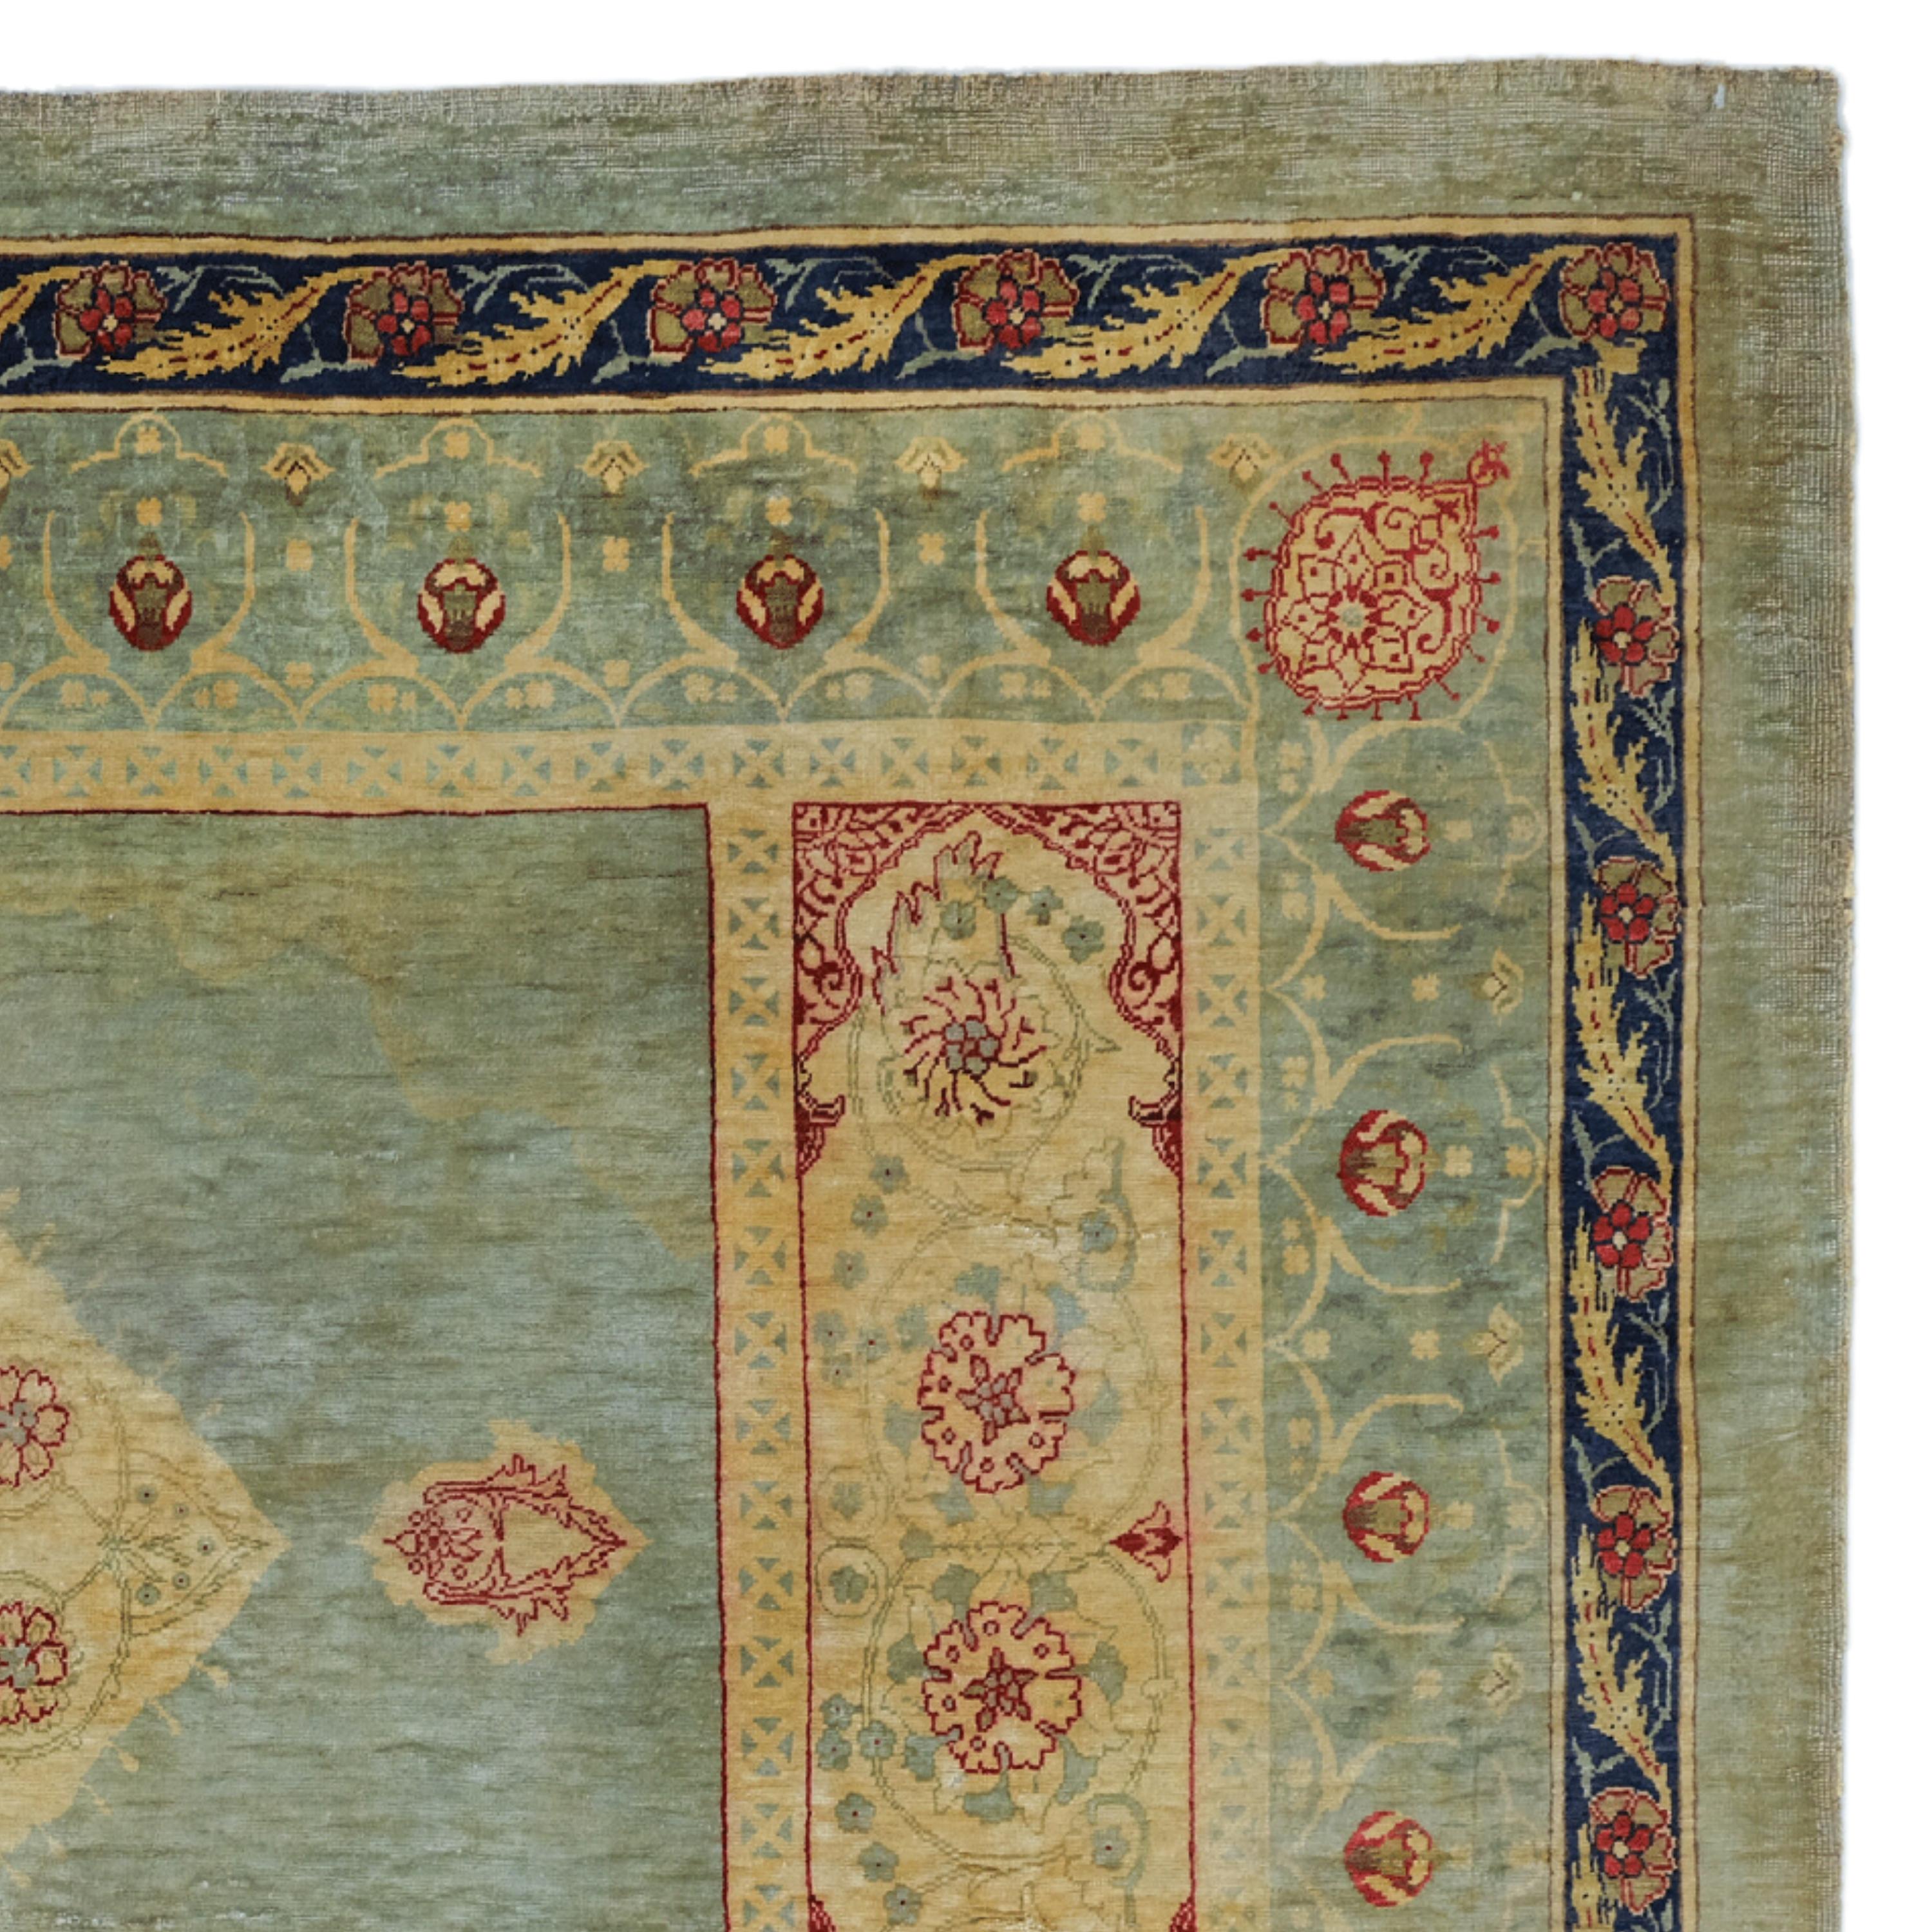 Late 19th Century Silk Feshane Quran-Qab Design Rug, Antique Rug, Handwoven Rug In Good Condition For Sale In Sultanahmet, 34